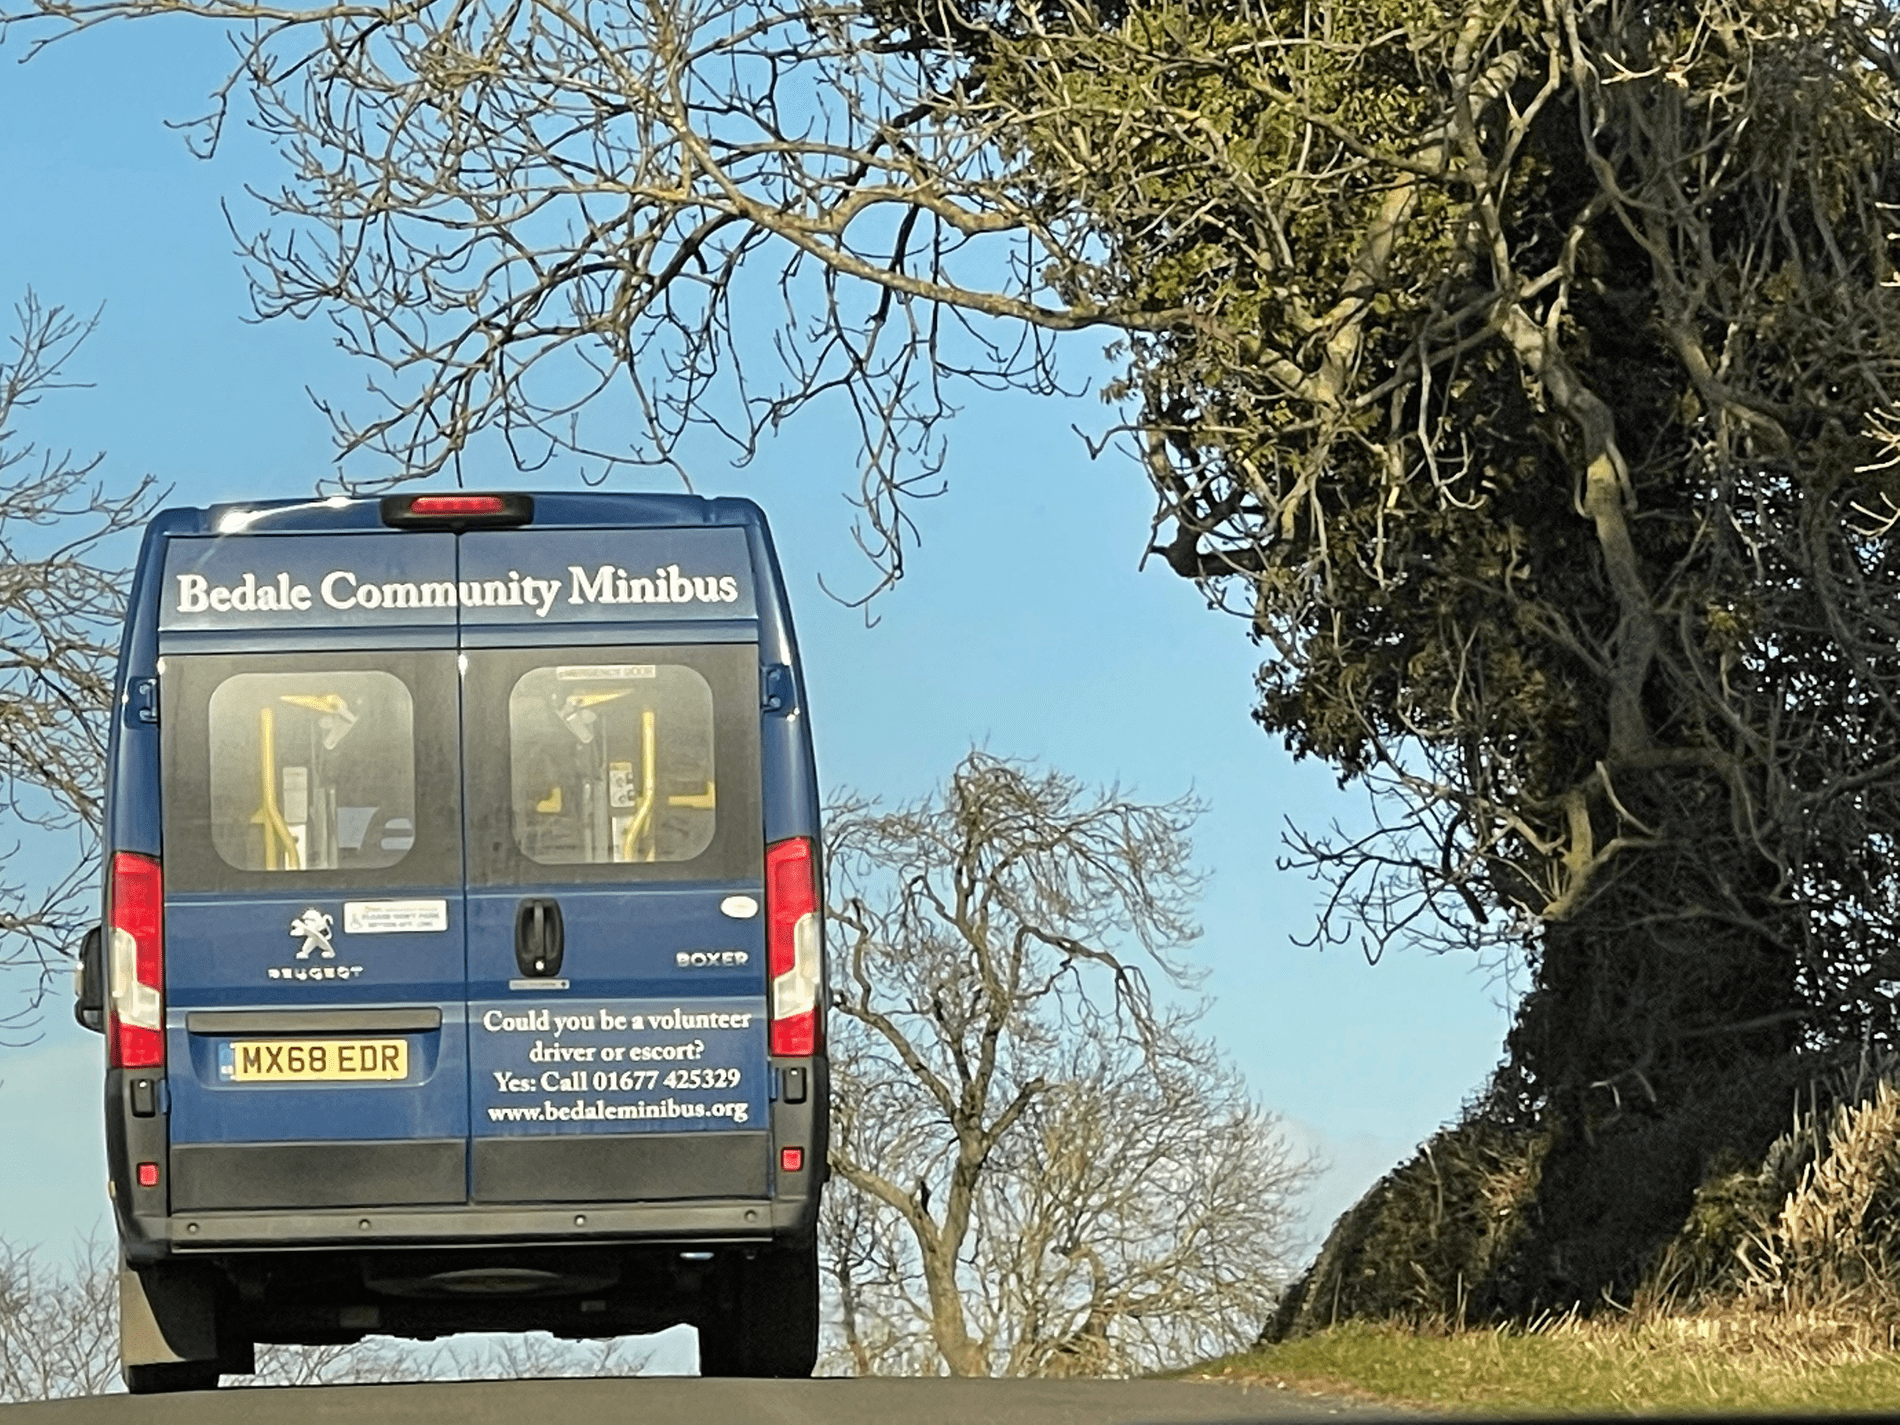 A Bedale Community Minibus Bus Traveling down a Tree Lined Back Road